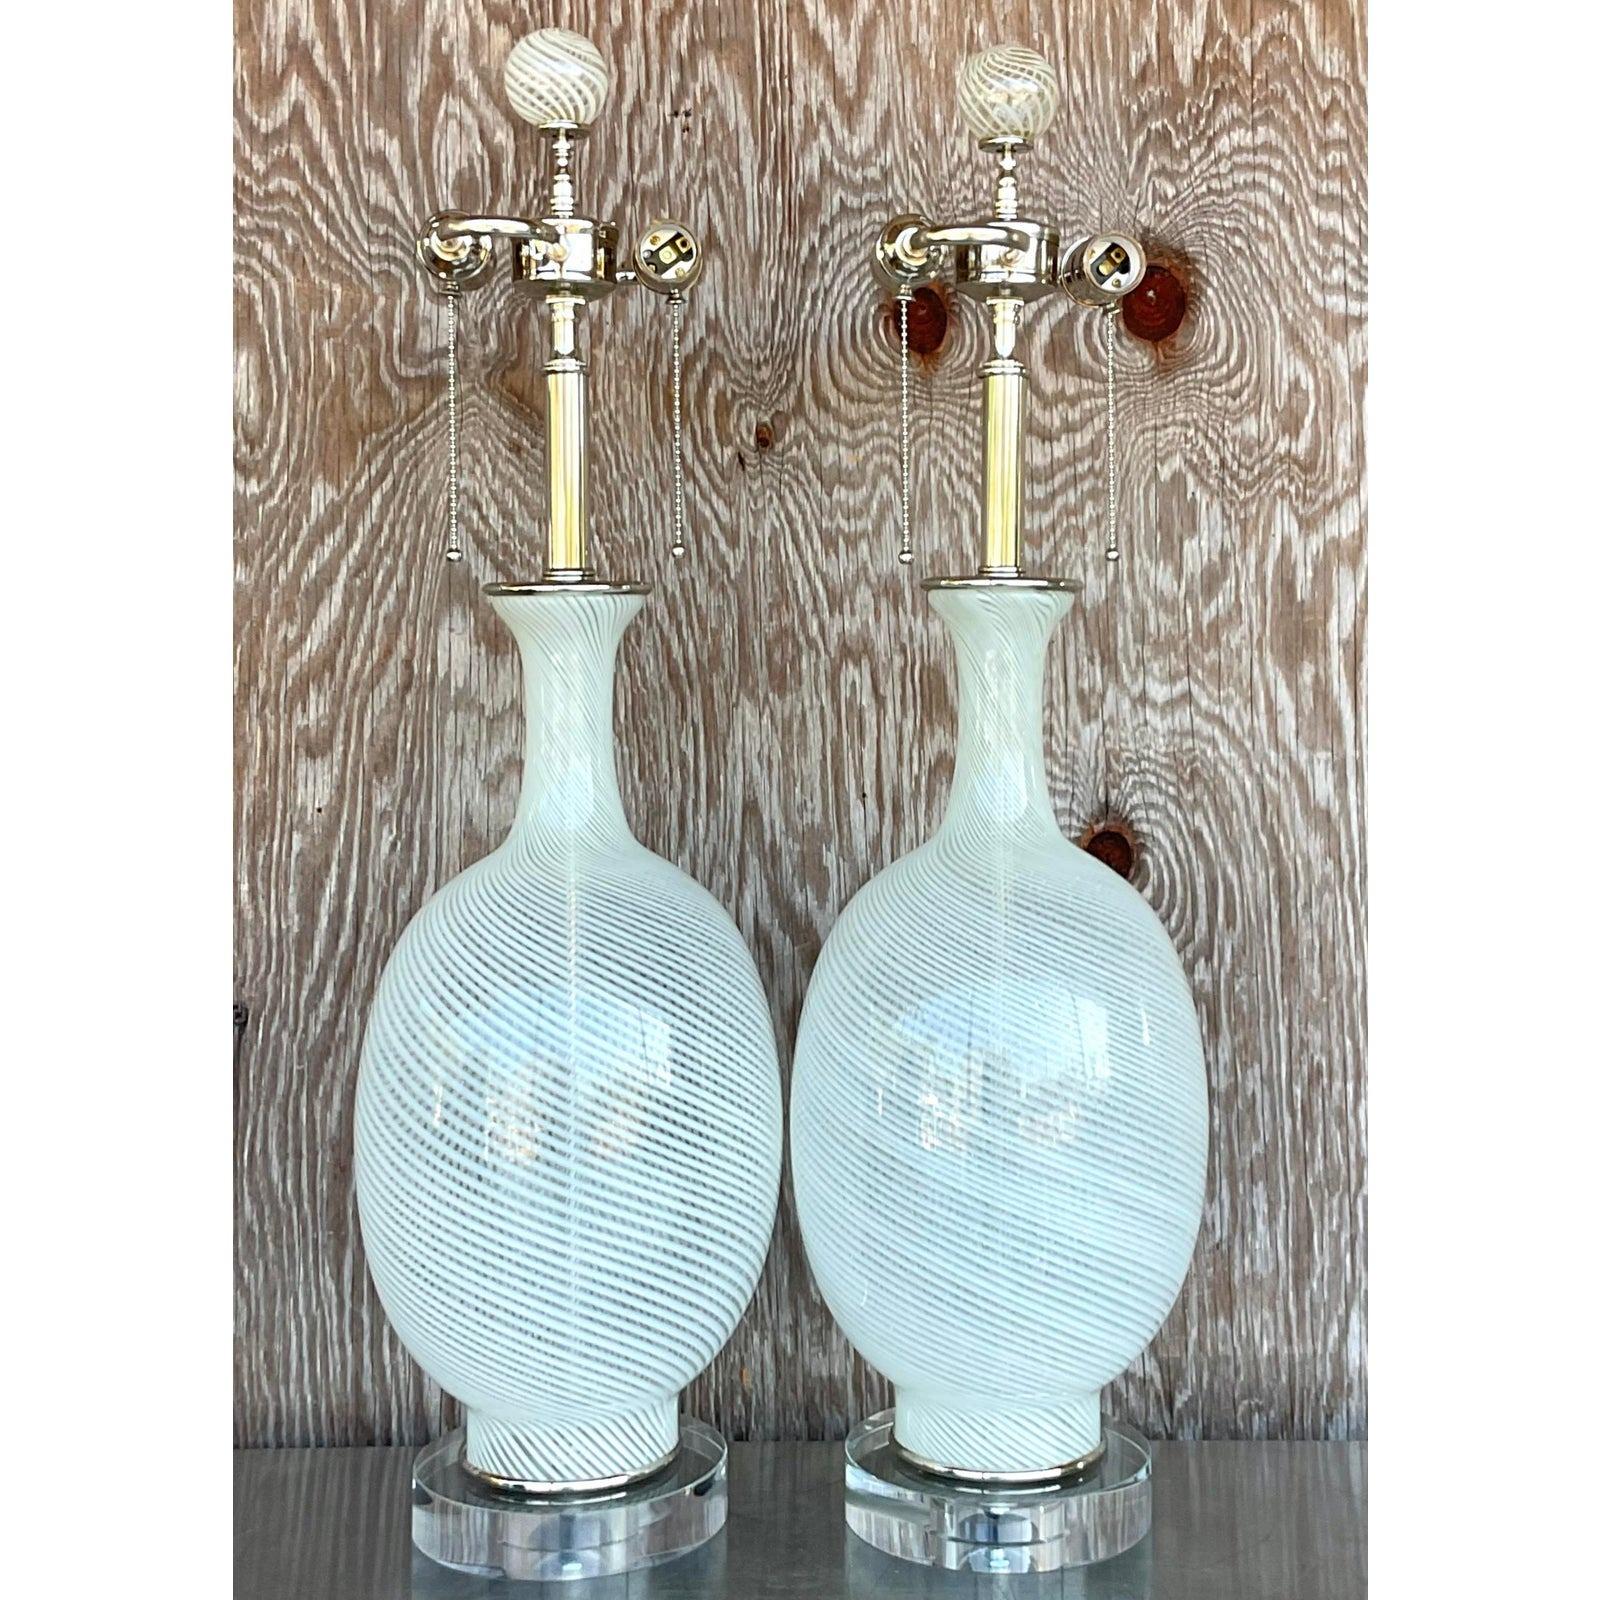 Lucite Vintage Regency Murano Swirl Lamps, a Pair